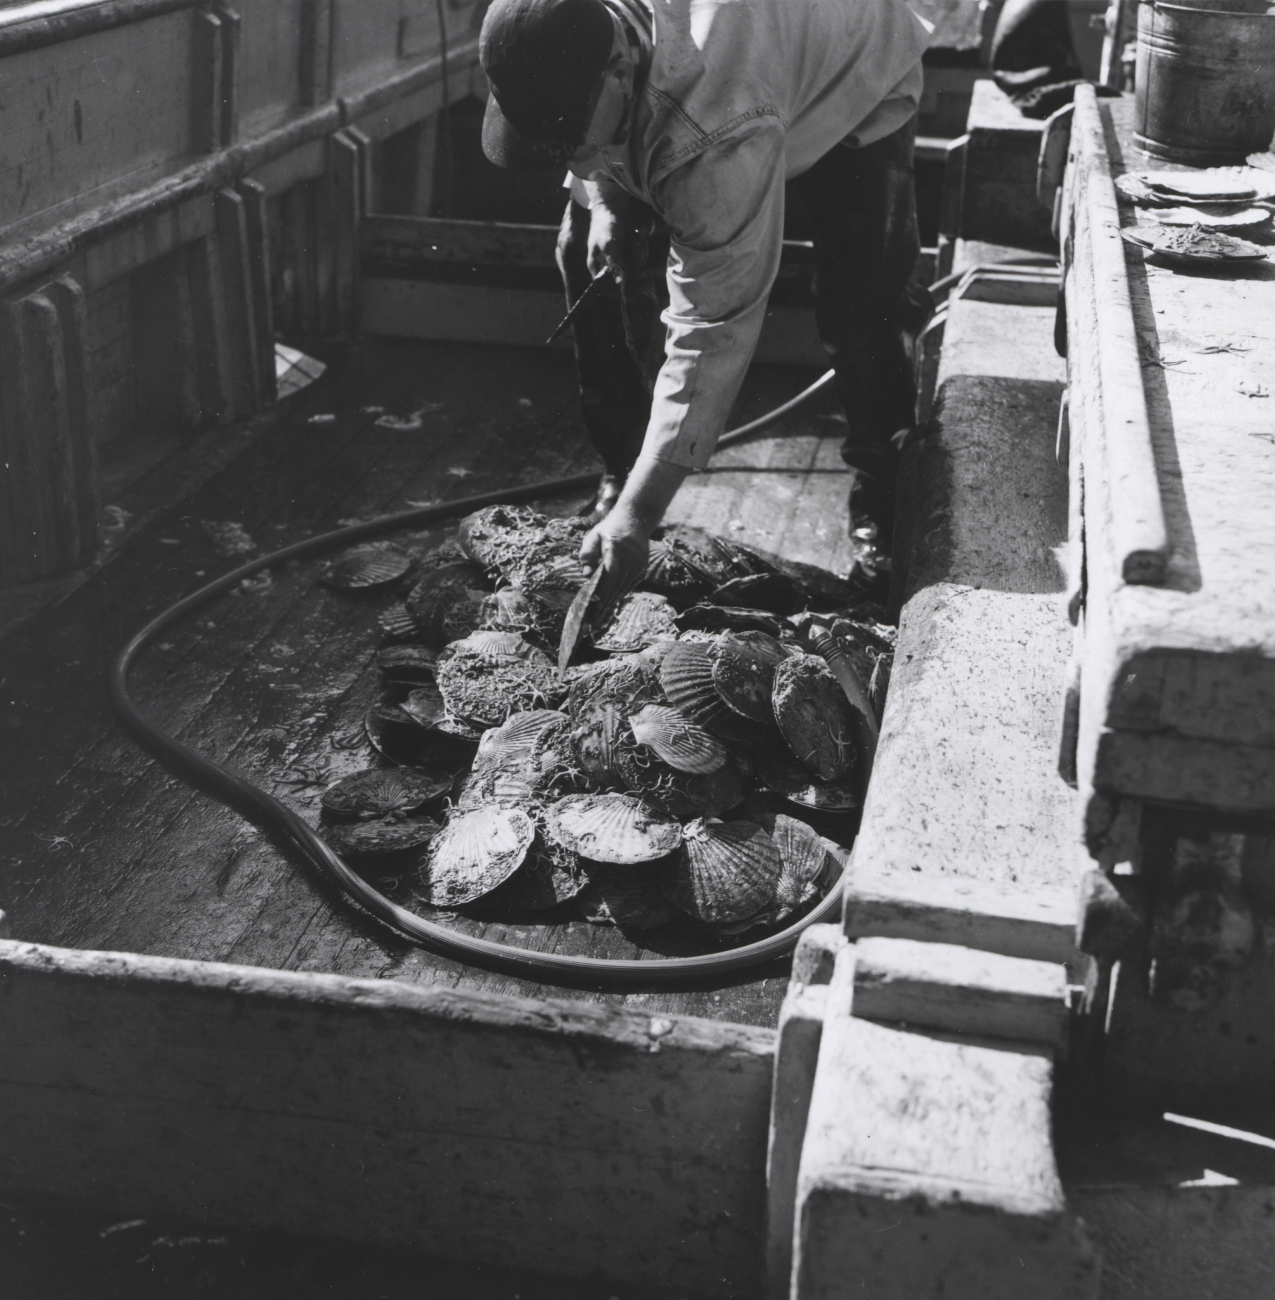 Large scallops on deck of M/V Tordenskjold chartrered by BCF for exploratoryfishing in survey in Northern Gulf of Alaska